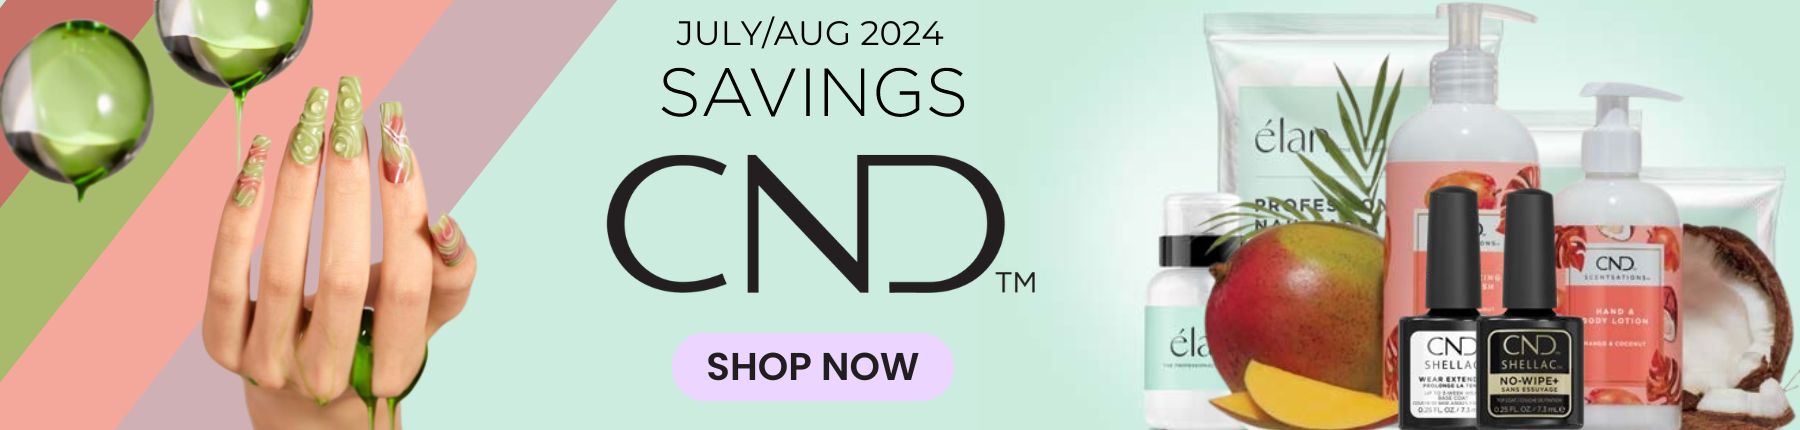 CND July August 2024